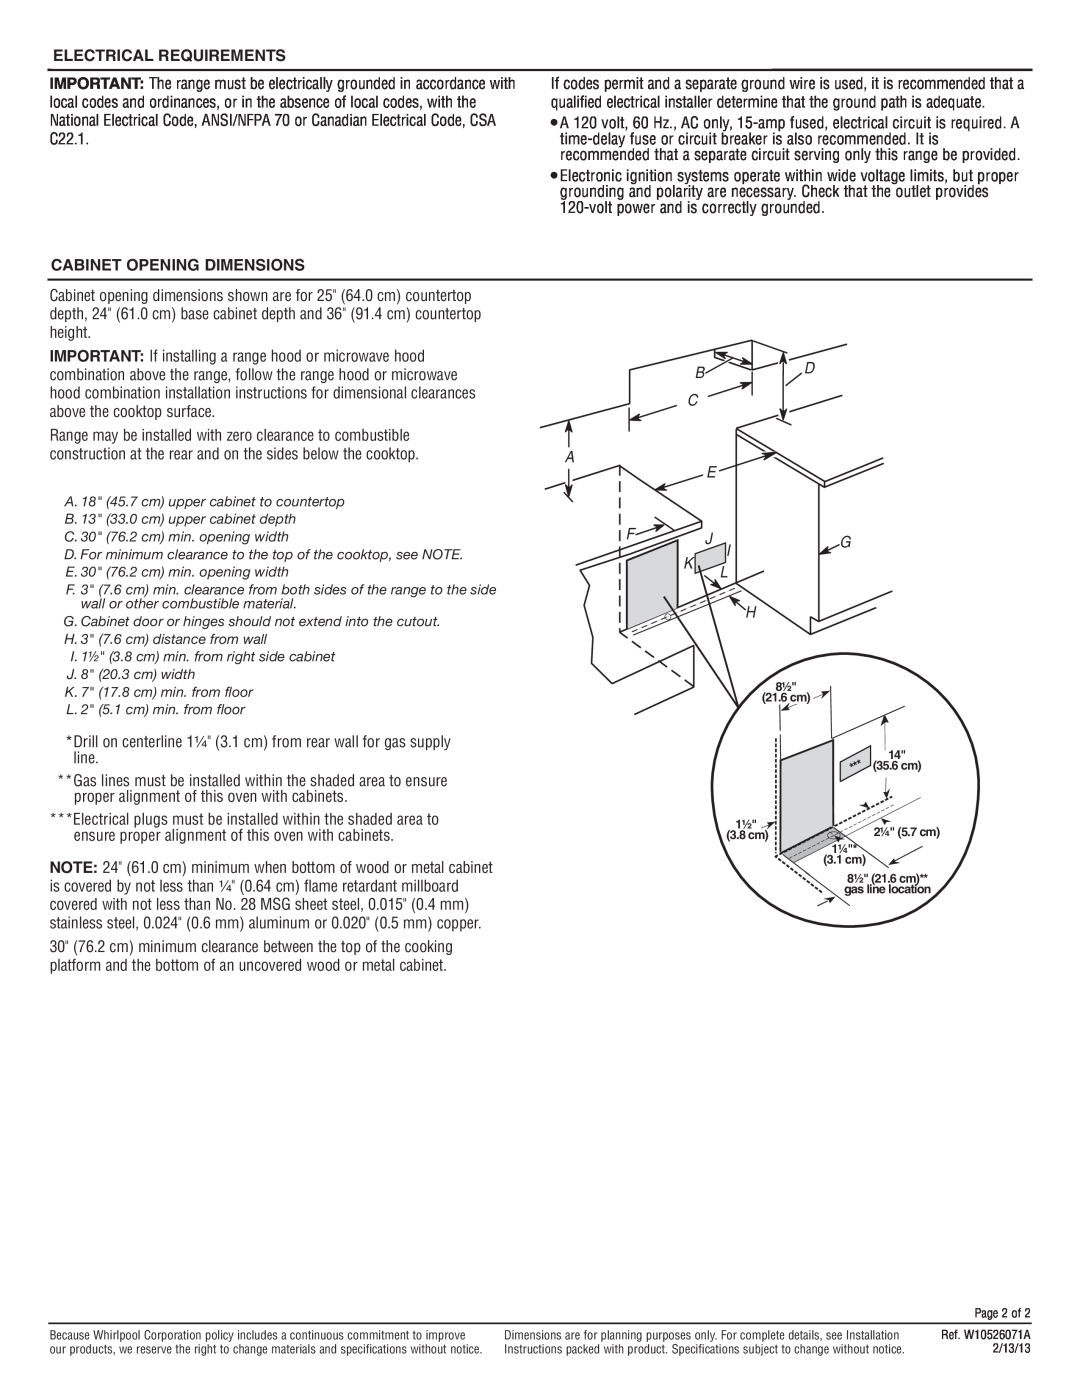 Whirlpool GGG390LX, GGG388LX dimensions Electrical Requirements, Cabinet Opening Dimensions 